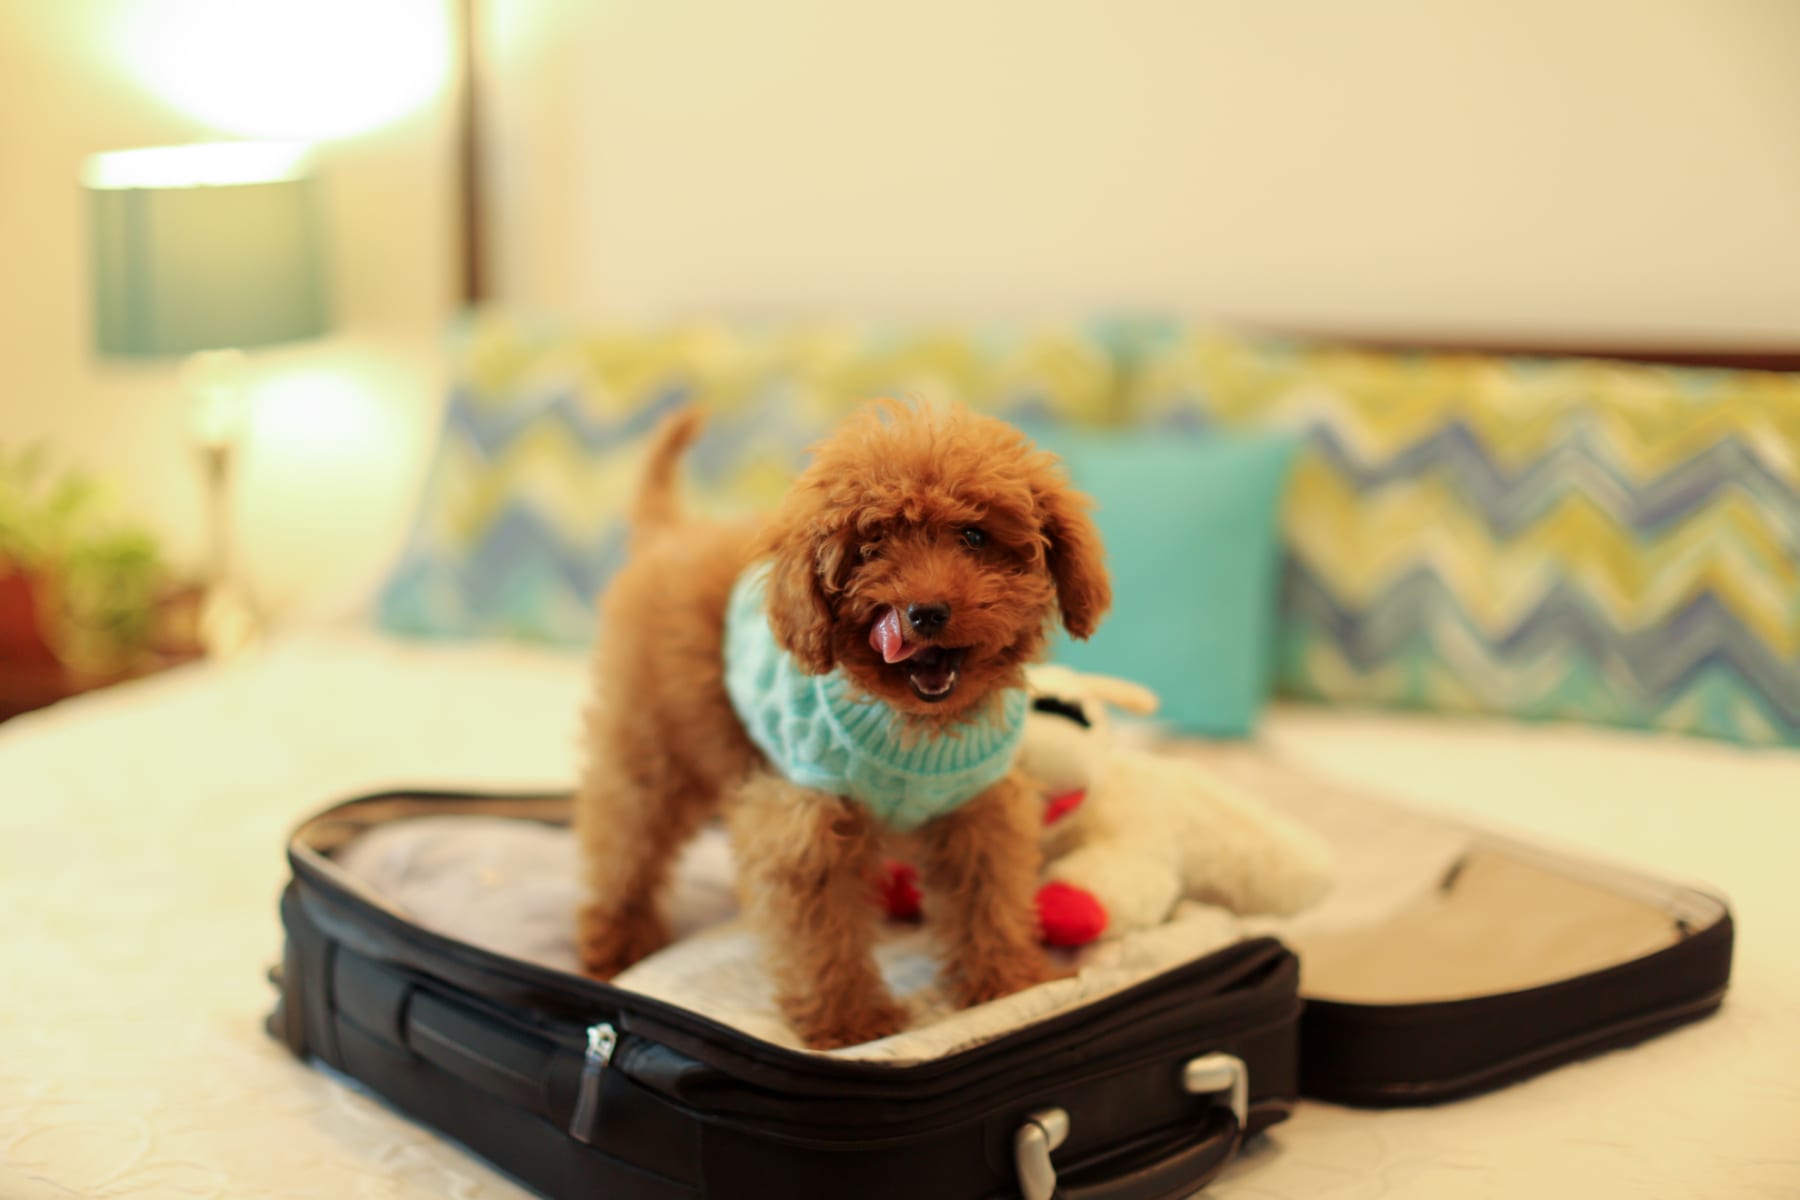 Little dog in an open suitcase on a bed.